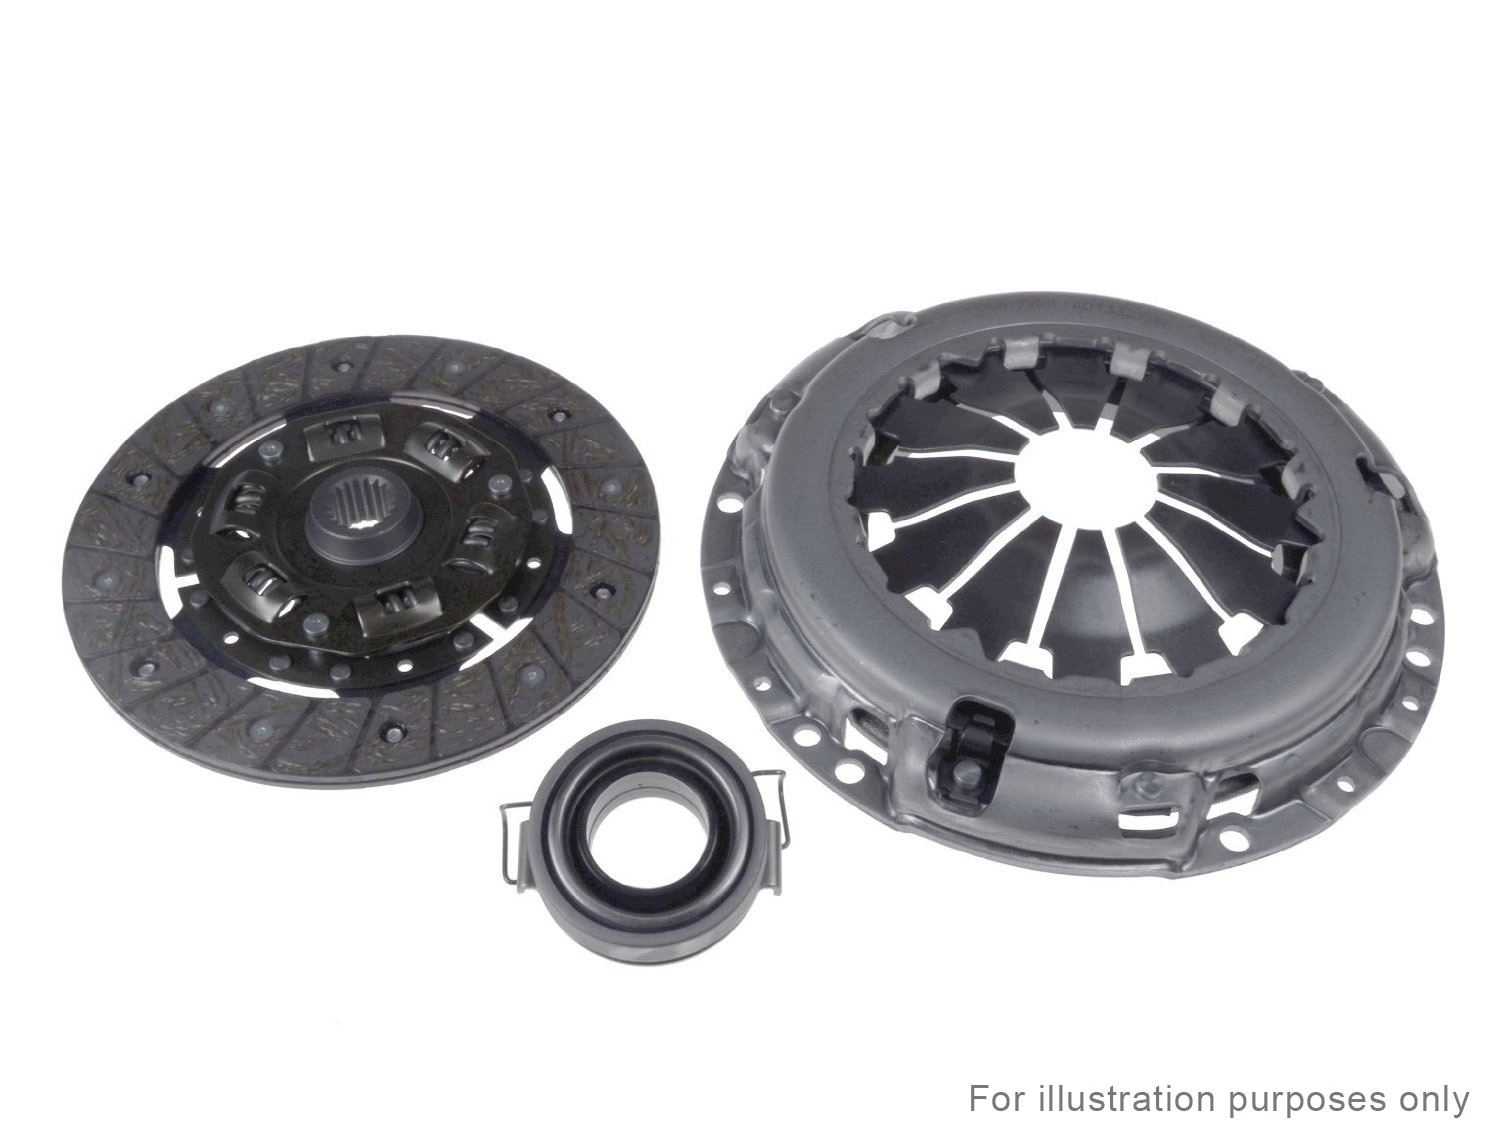 Clutch Kit 3pc (Cover+Plate+Releaser) fits SUBARU IMPREZA 2.0 1995 on Quality - Picture 1 of 1